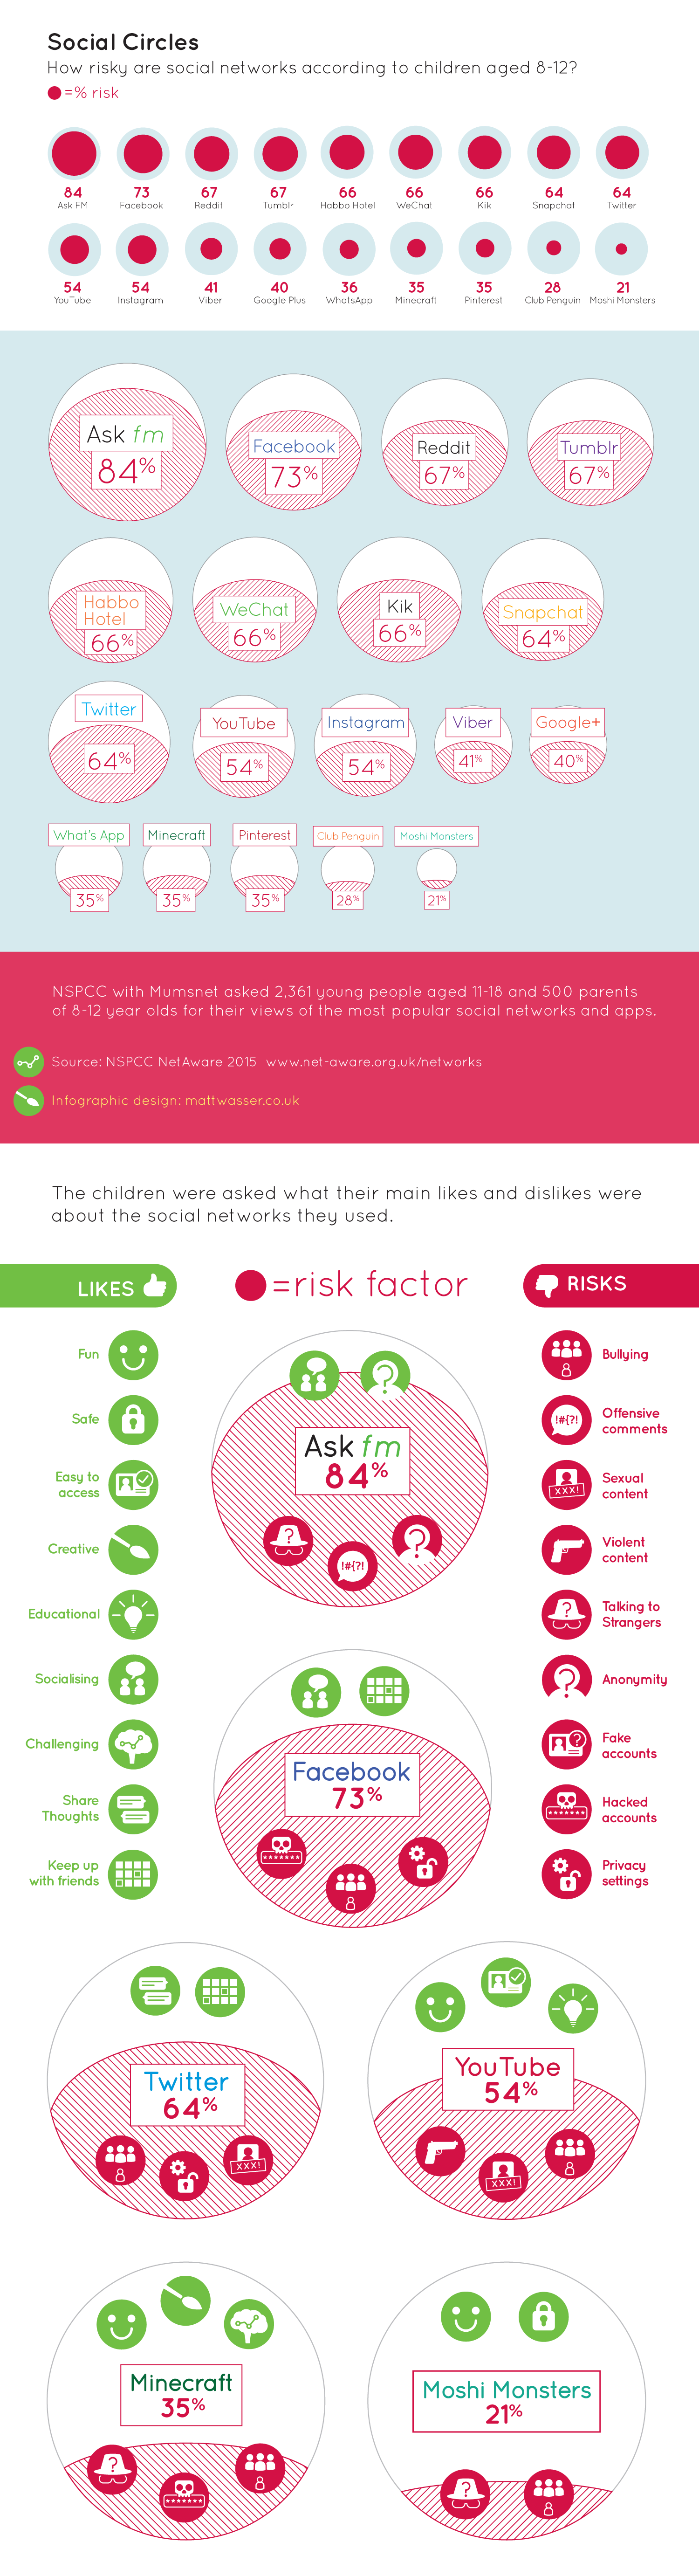 Social Circles - What do kids think of Social Networks? Infographic